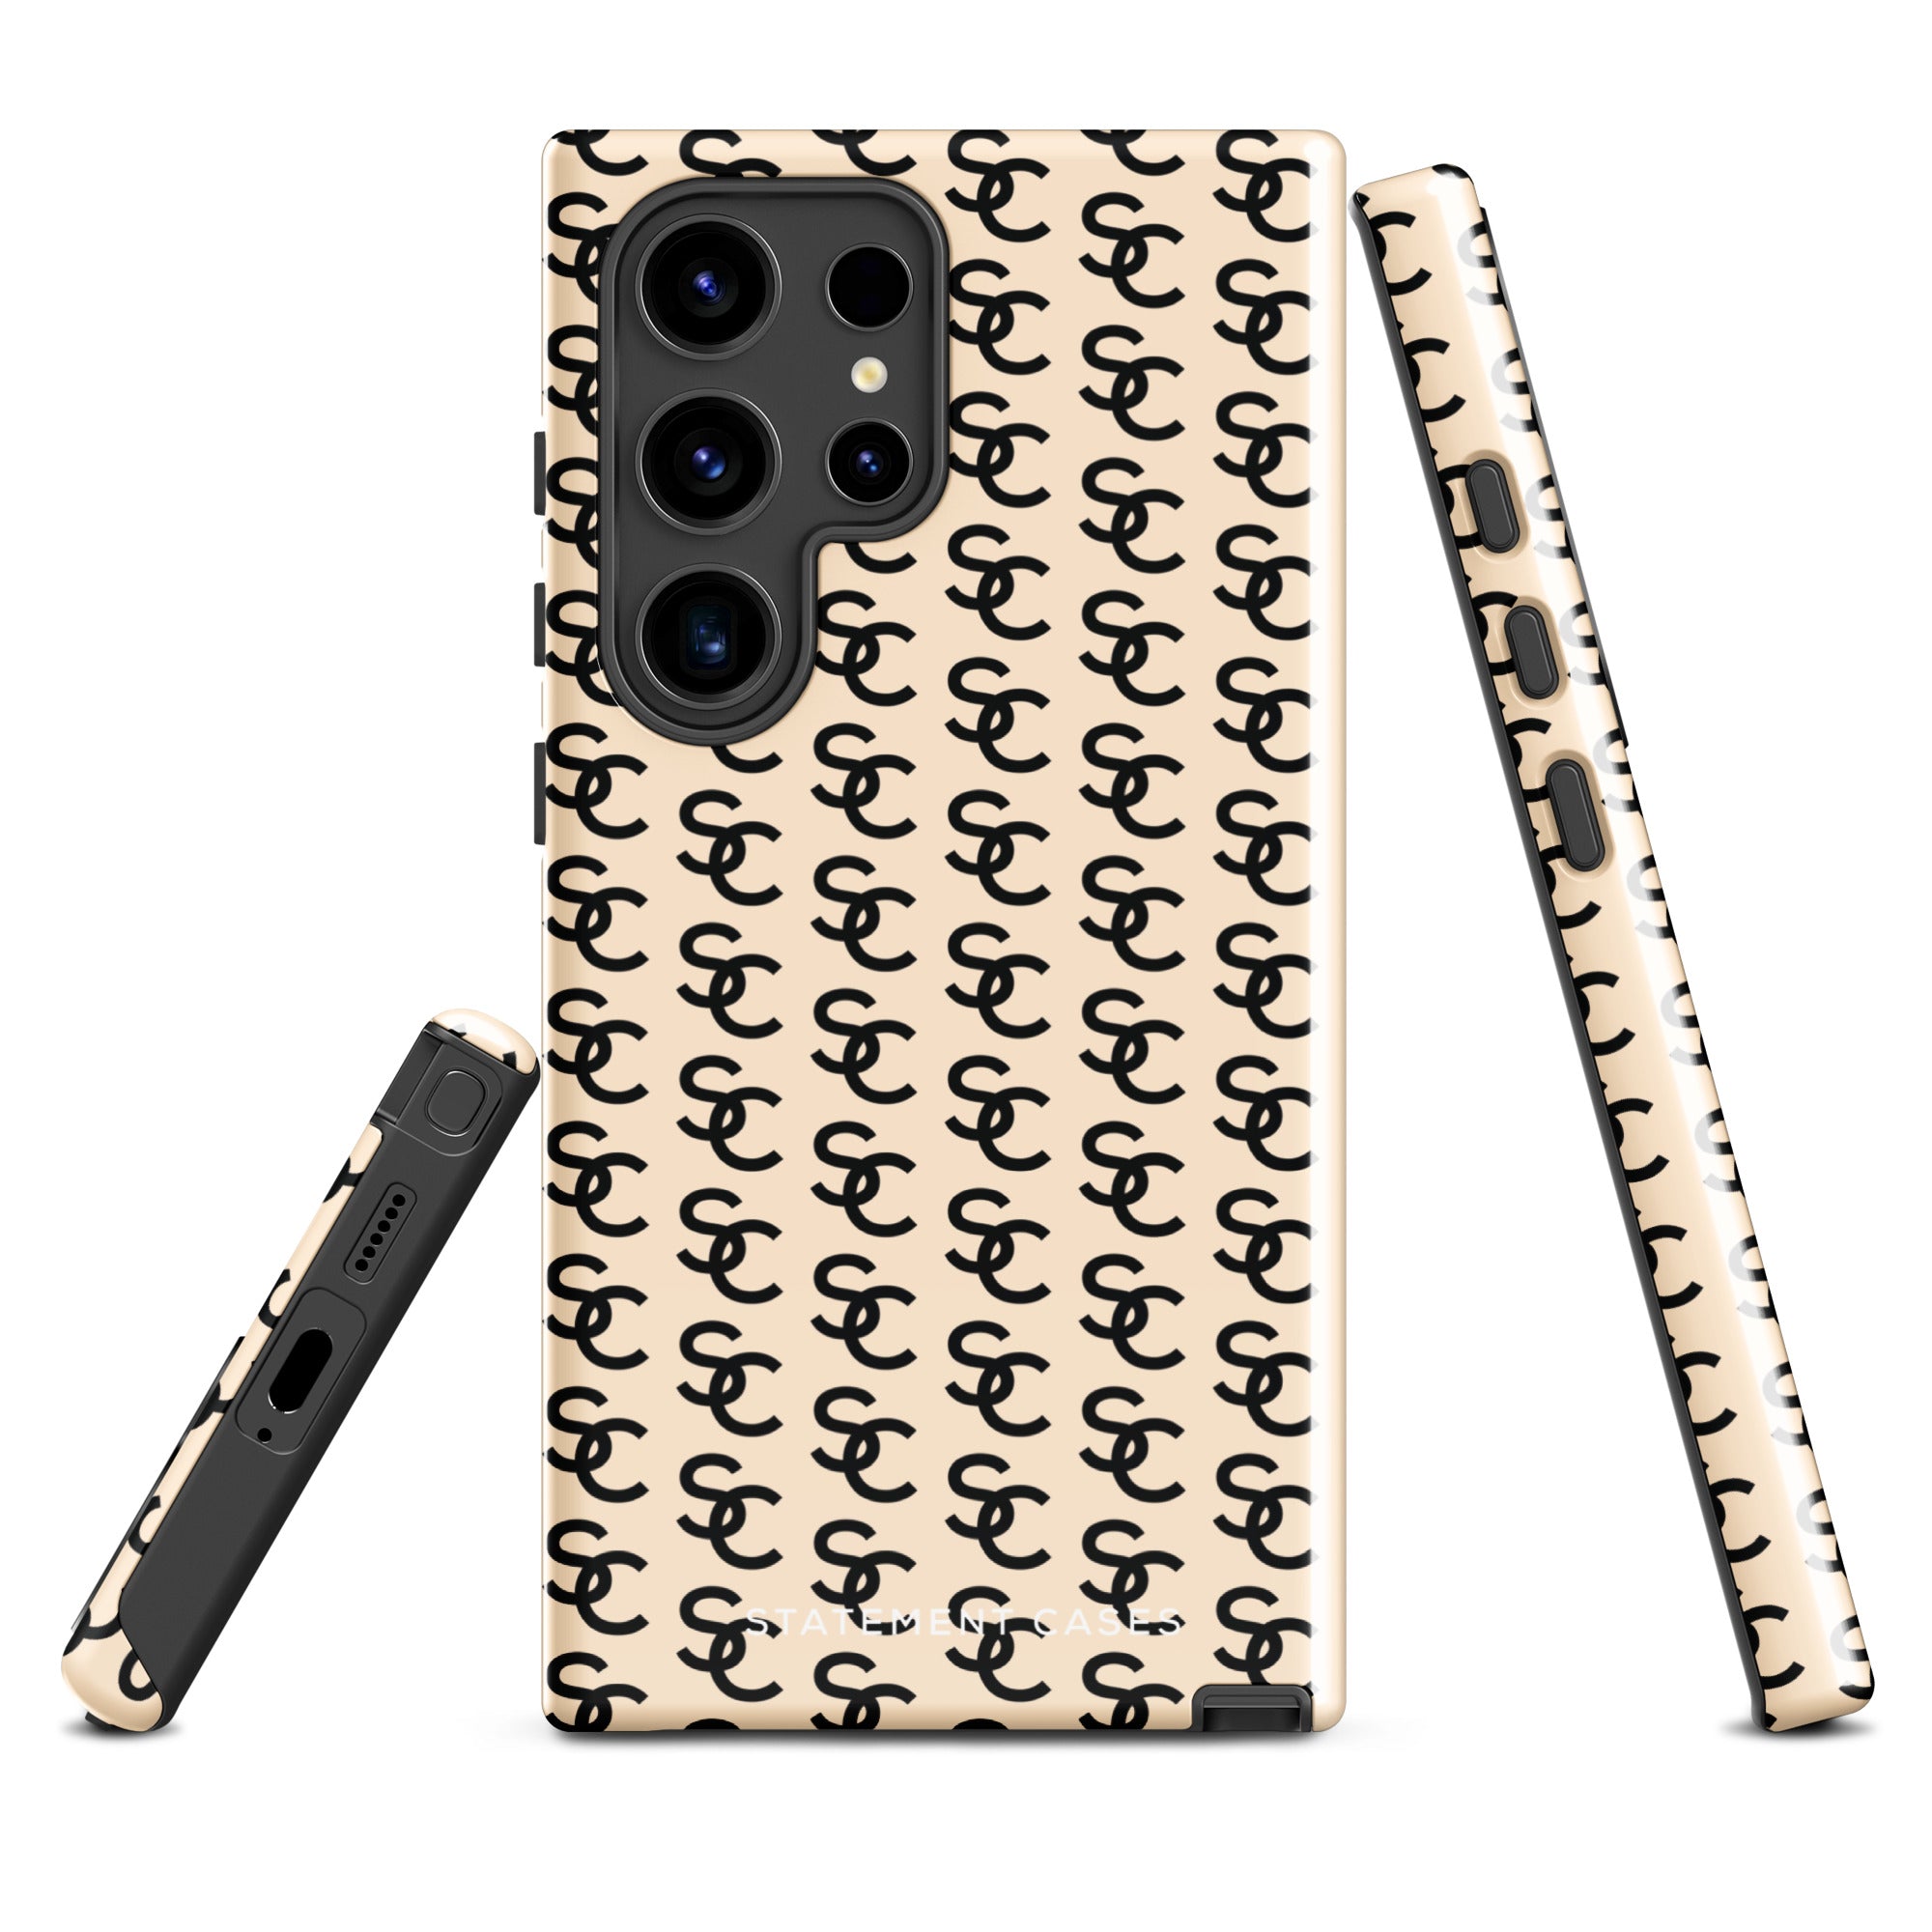 A beige smartphone case with a repeating black double-C logo pattern. The back of the impact-resistant phone case features camera cutouts aligned on the left side, accommodating what appears to be a multi-lens camera system. This is the Heritage Monogram for Samsung by Statement Cases.